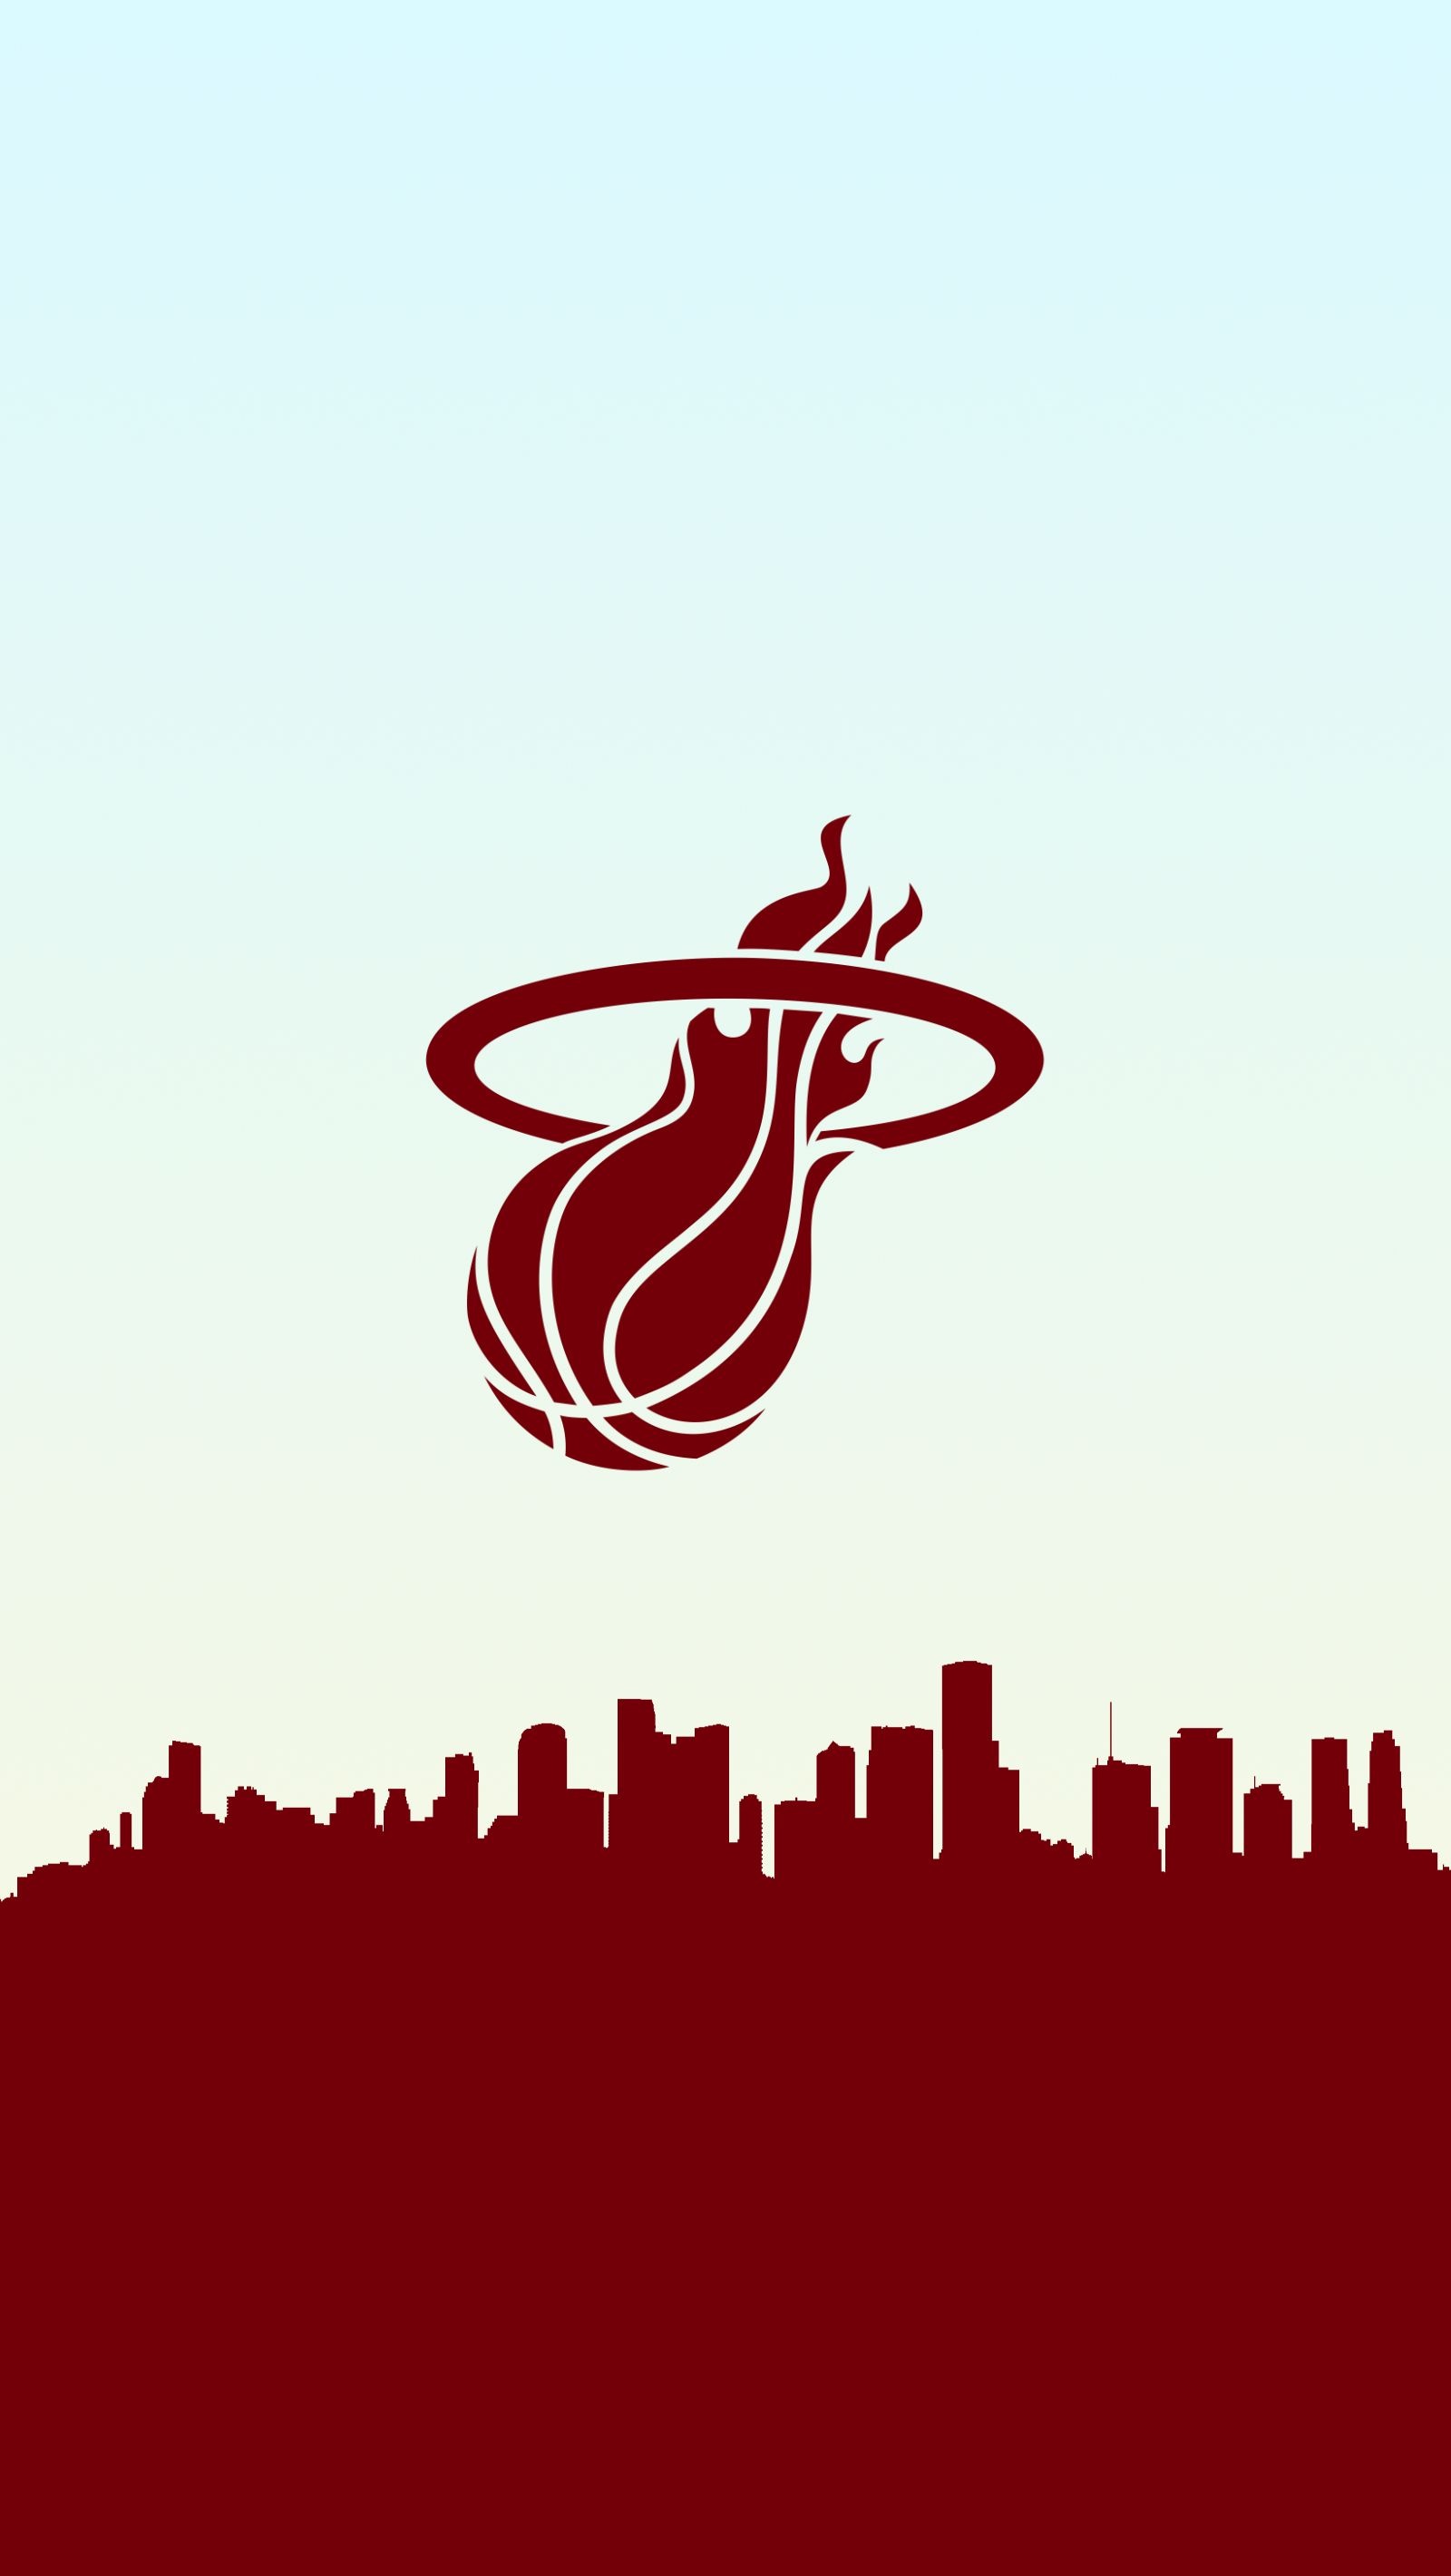 Miami Heat: The team signed league MVP LeBron James and NBA All-Star Chris Bosh in 2010. 1600x2840 HD Background.